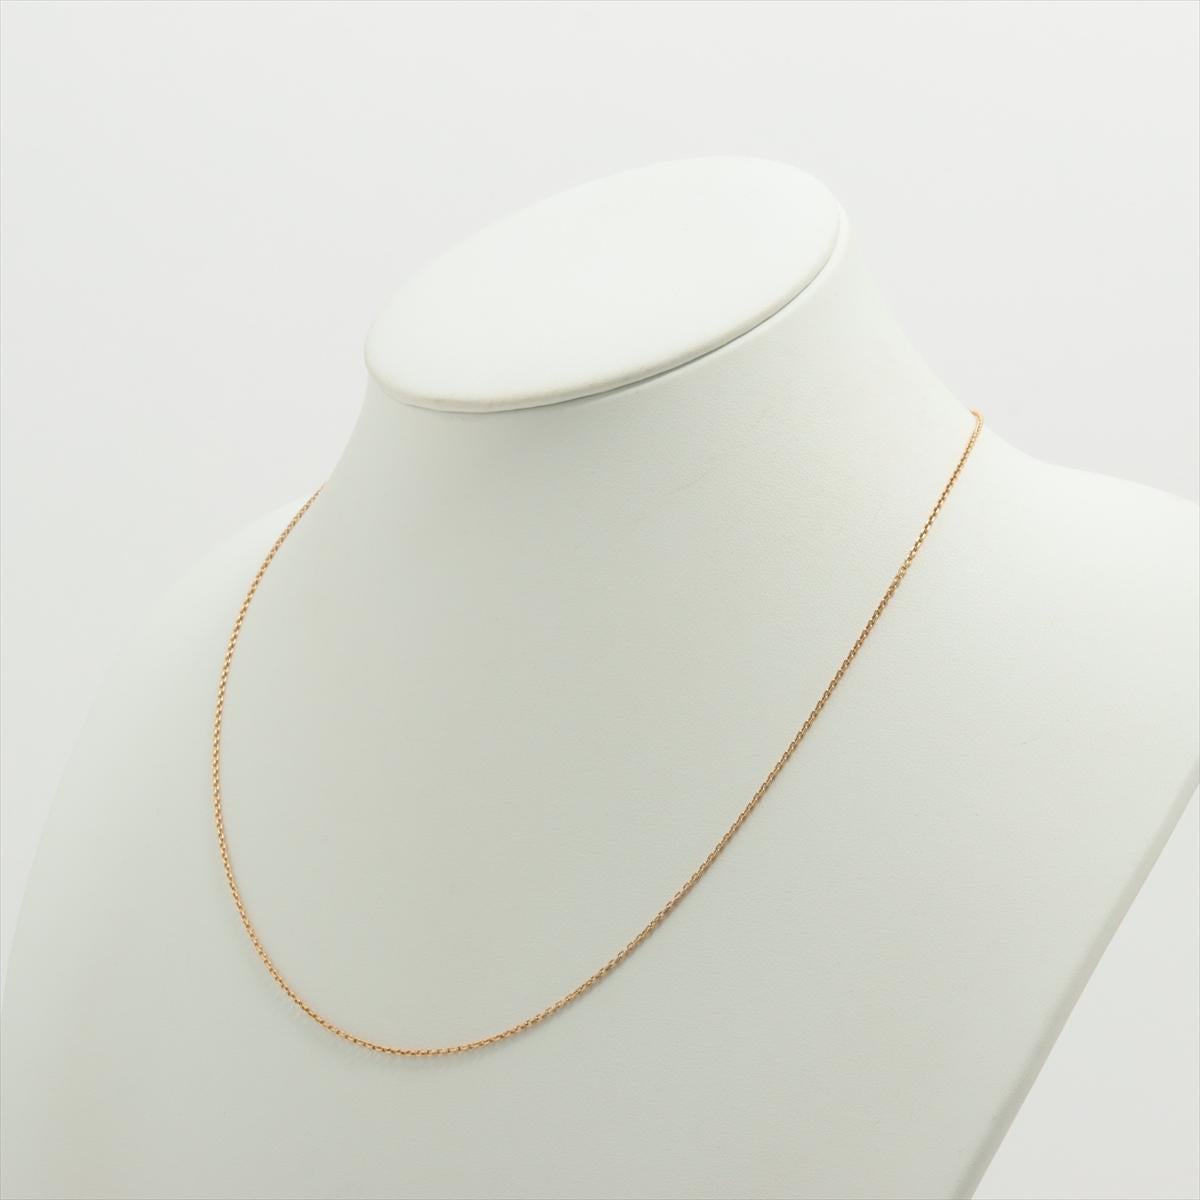 The Louis Vuitton Link Chain Necklace in Gold is a luxurious and stylish accessory that embodies the elegance and craftsmanship . The necklace features a chain made of high-quality gold. The gold is finely crafted to create a gleaming and radiant